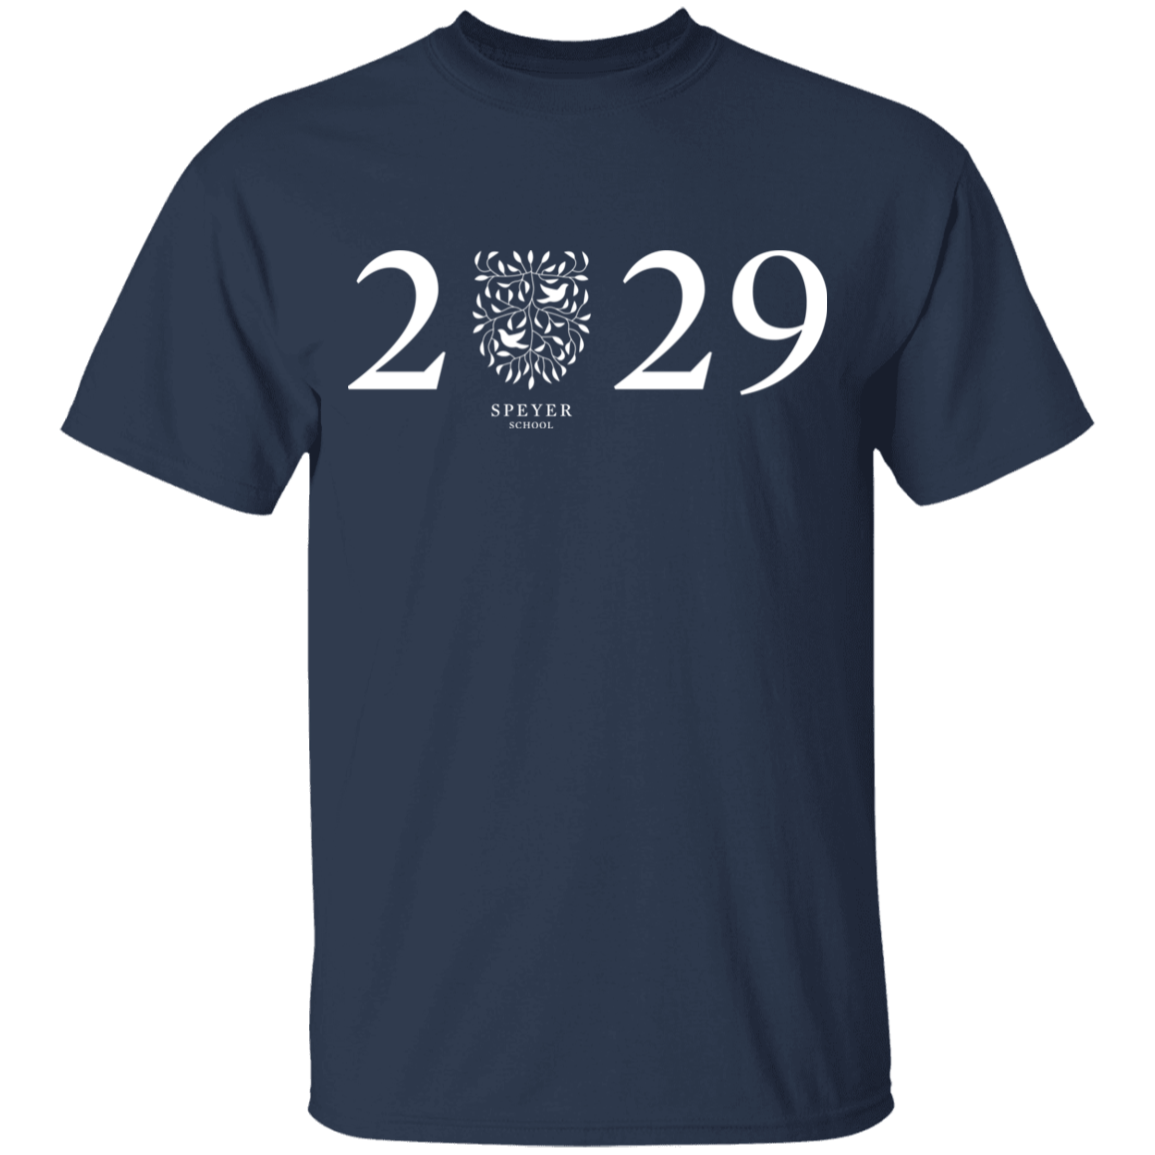 Class of 2029 T-Shirt, Youth Sizes